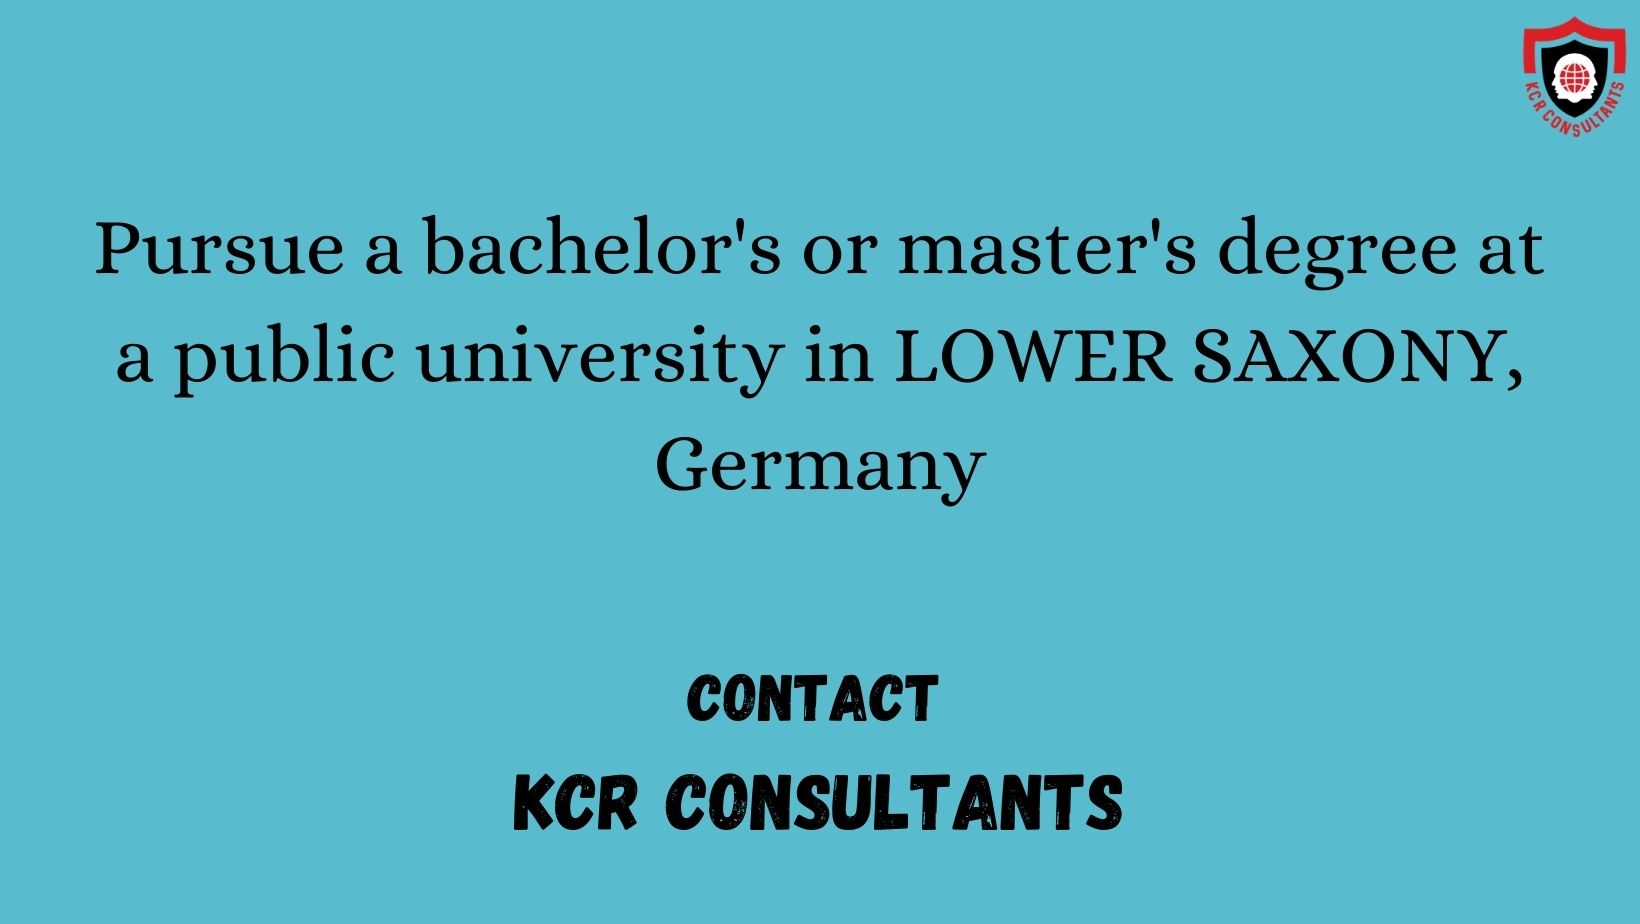 LOWER SAXONY - KCR CONSULTANTS - Contact us